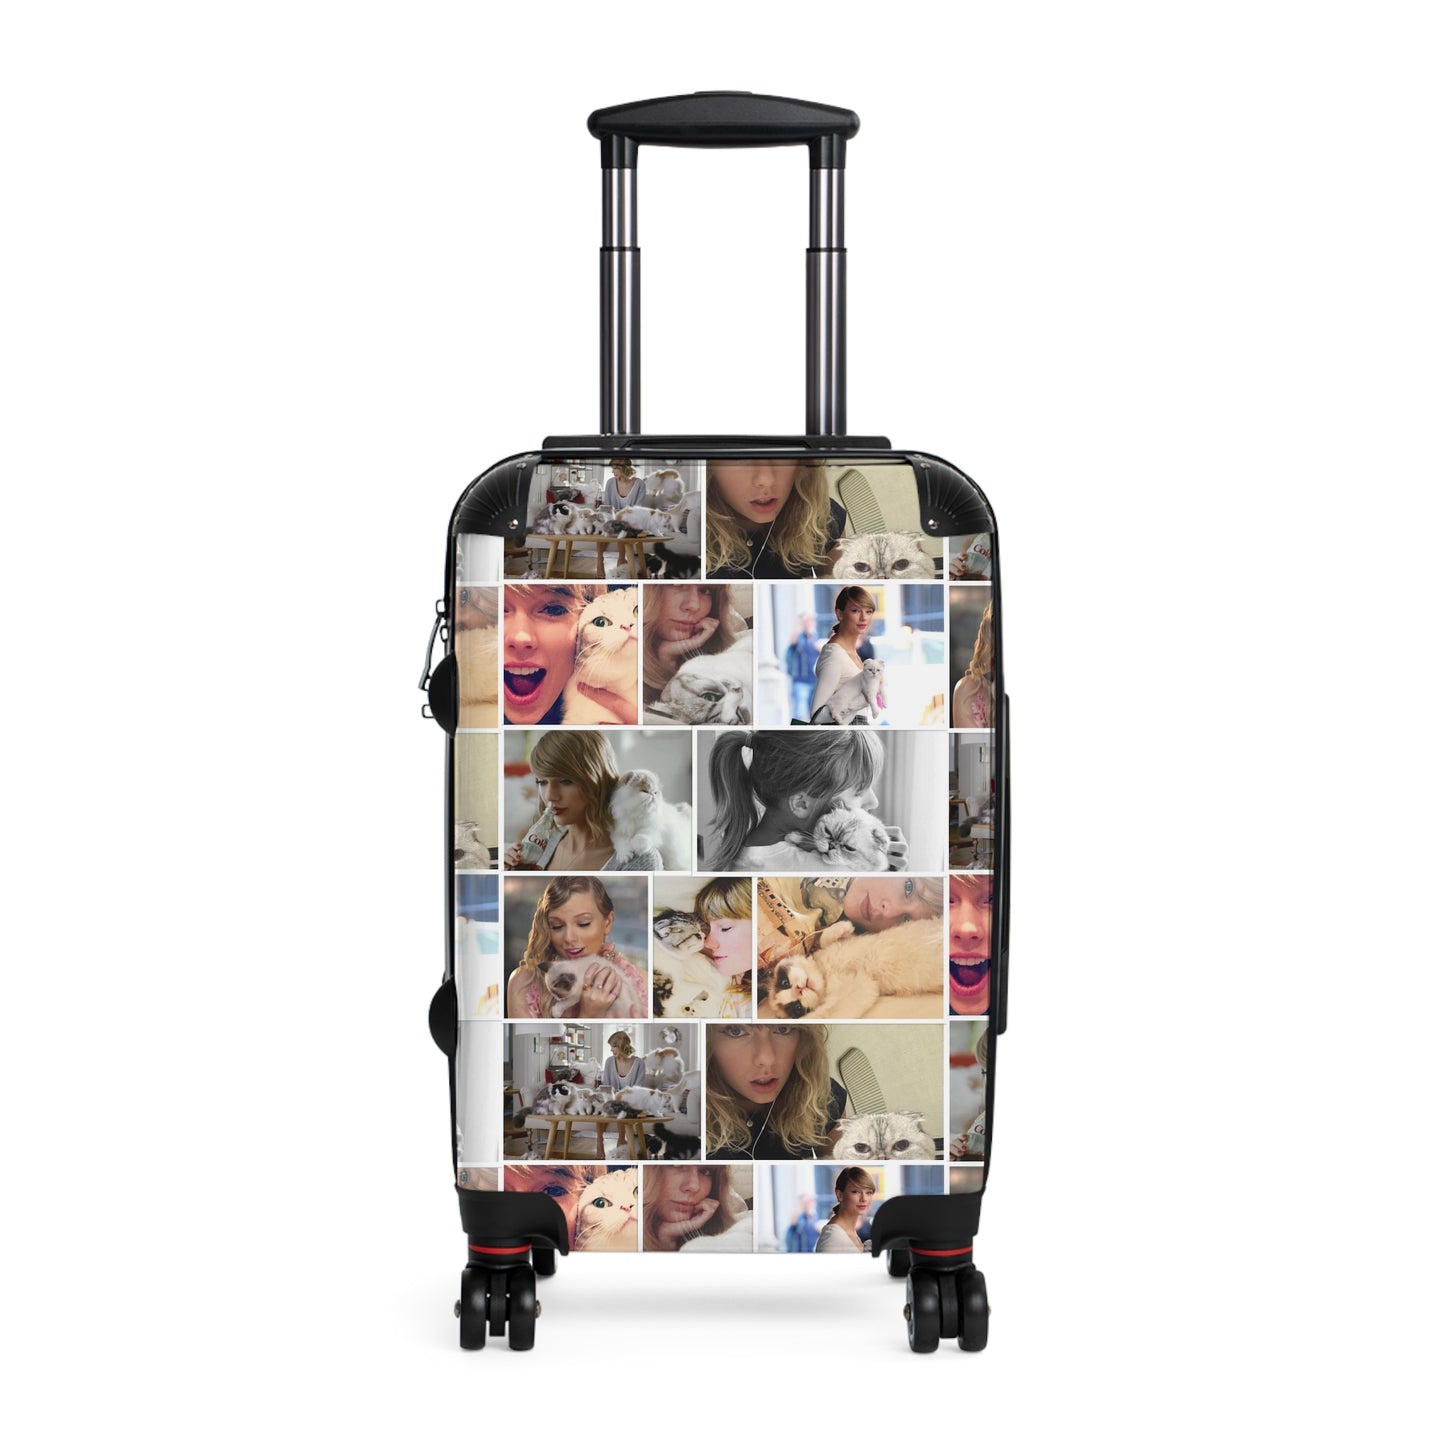 Taylor Swift's Cats Collage Pattern Suitcase